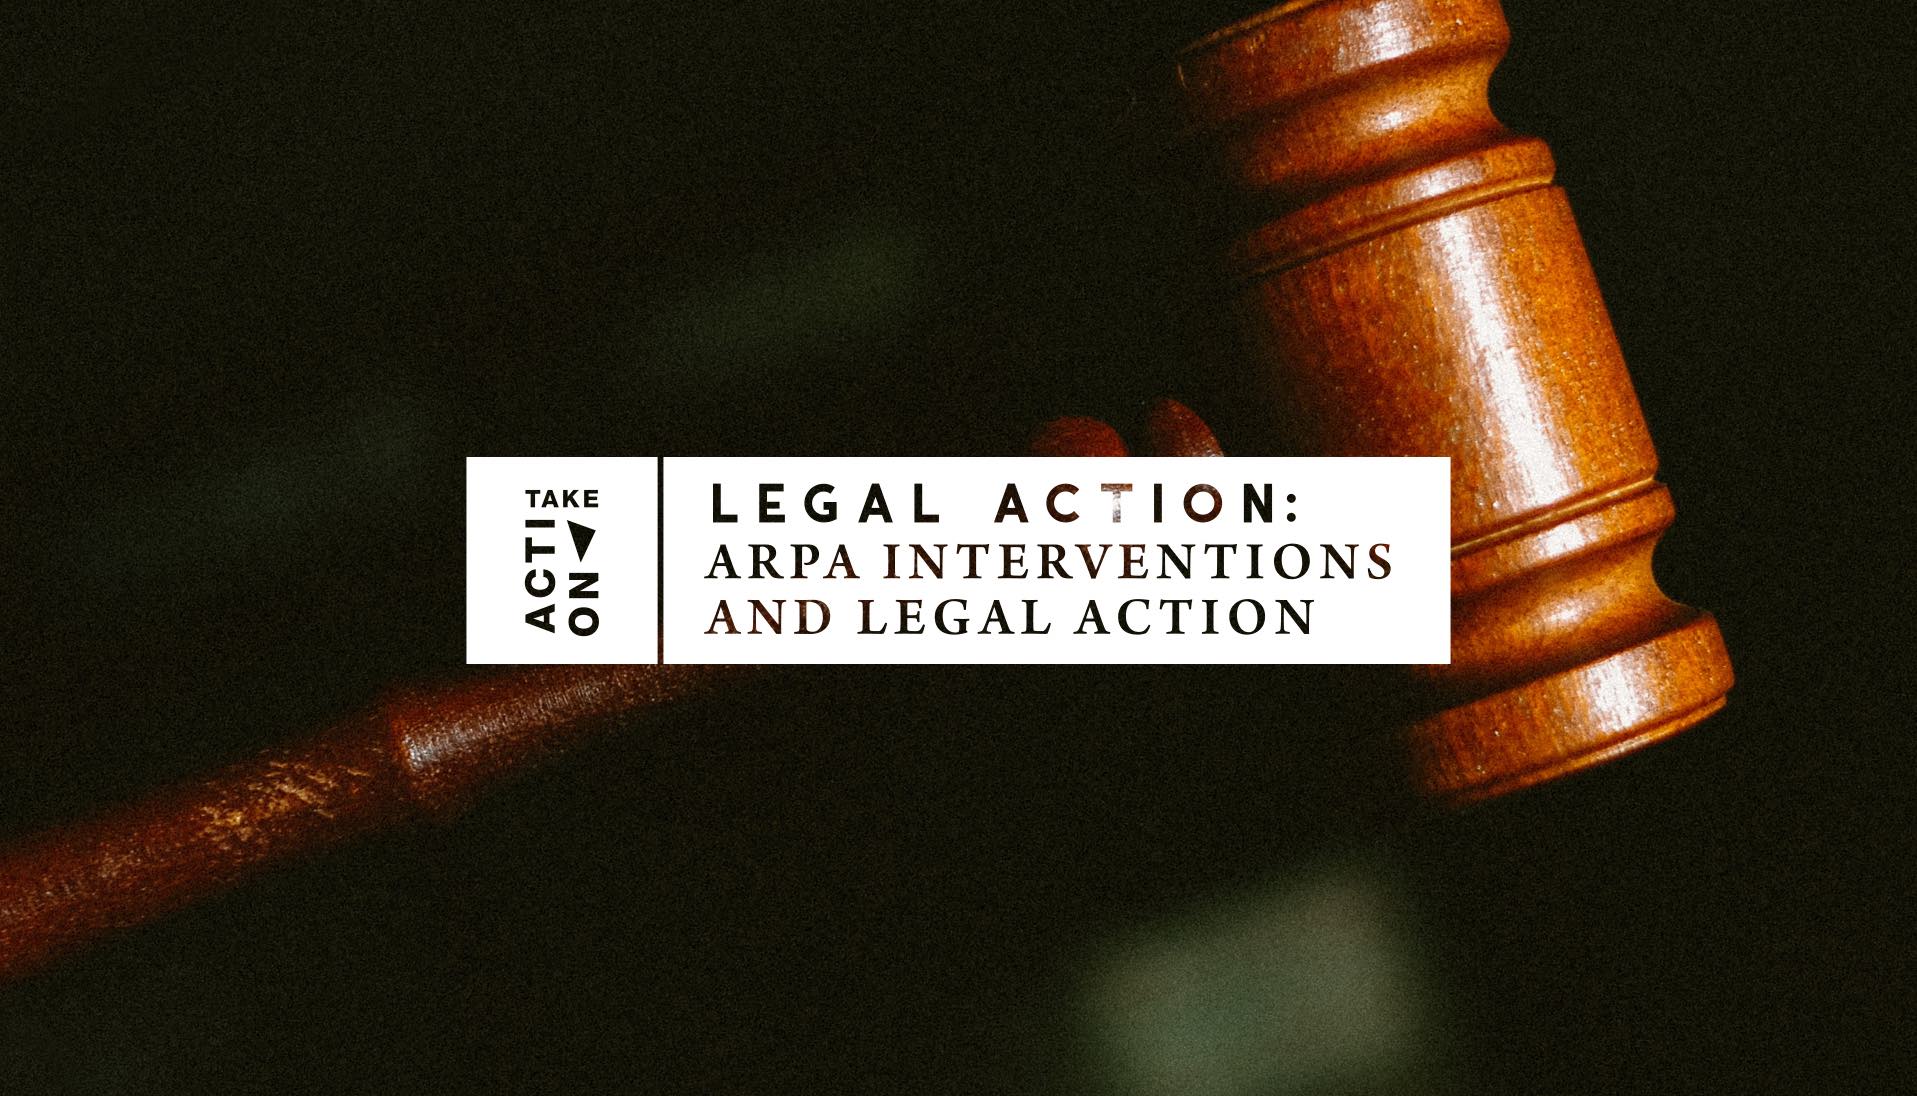 Current ARPA Interventions and Legal Action